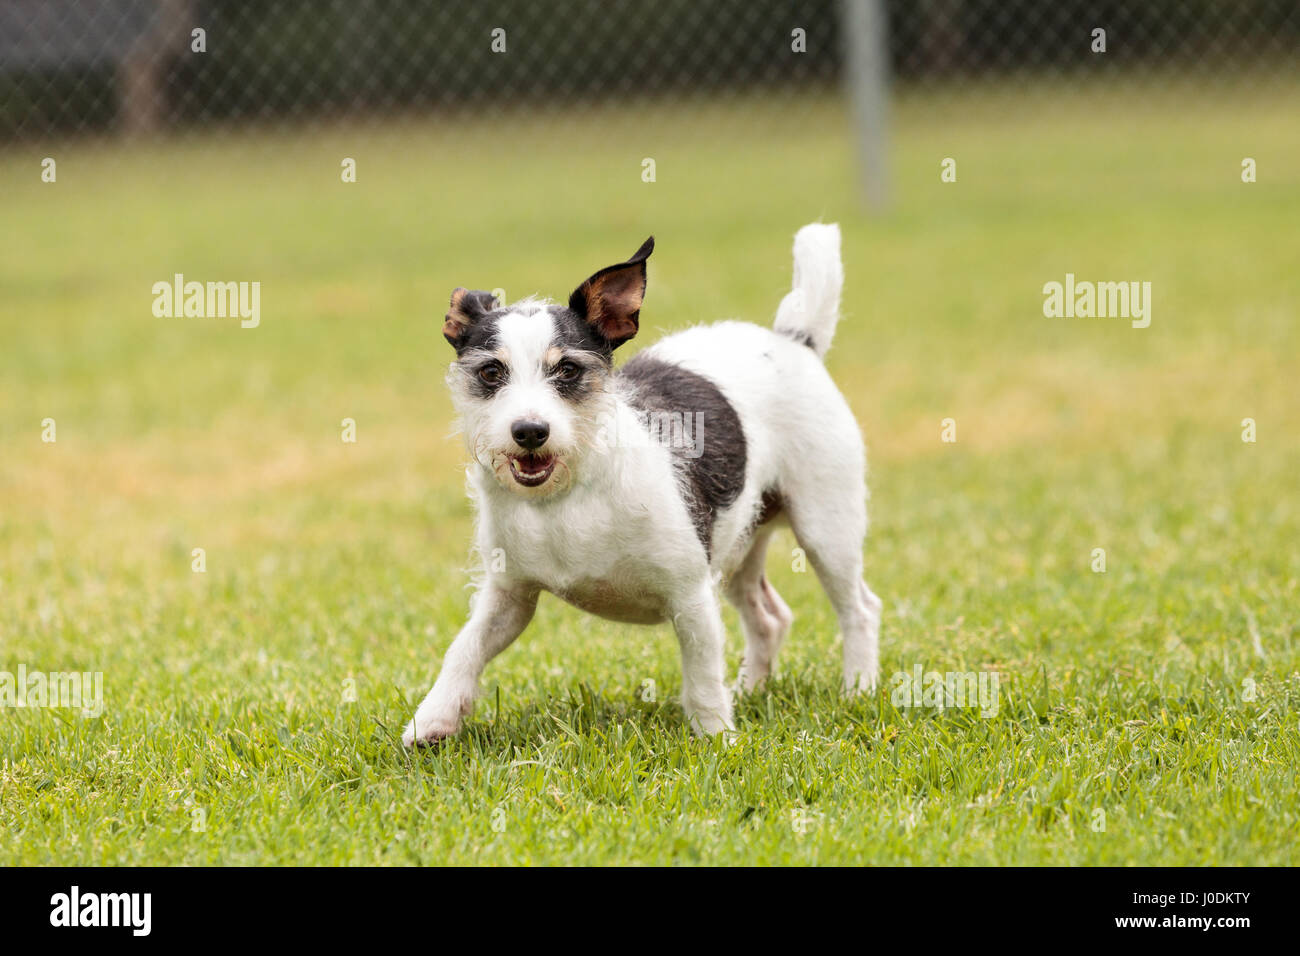 Terrier dog mix plays in a dog park in summer. Stock Photo